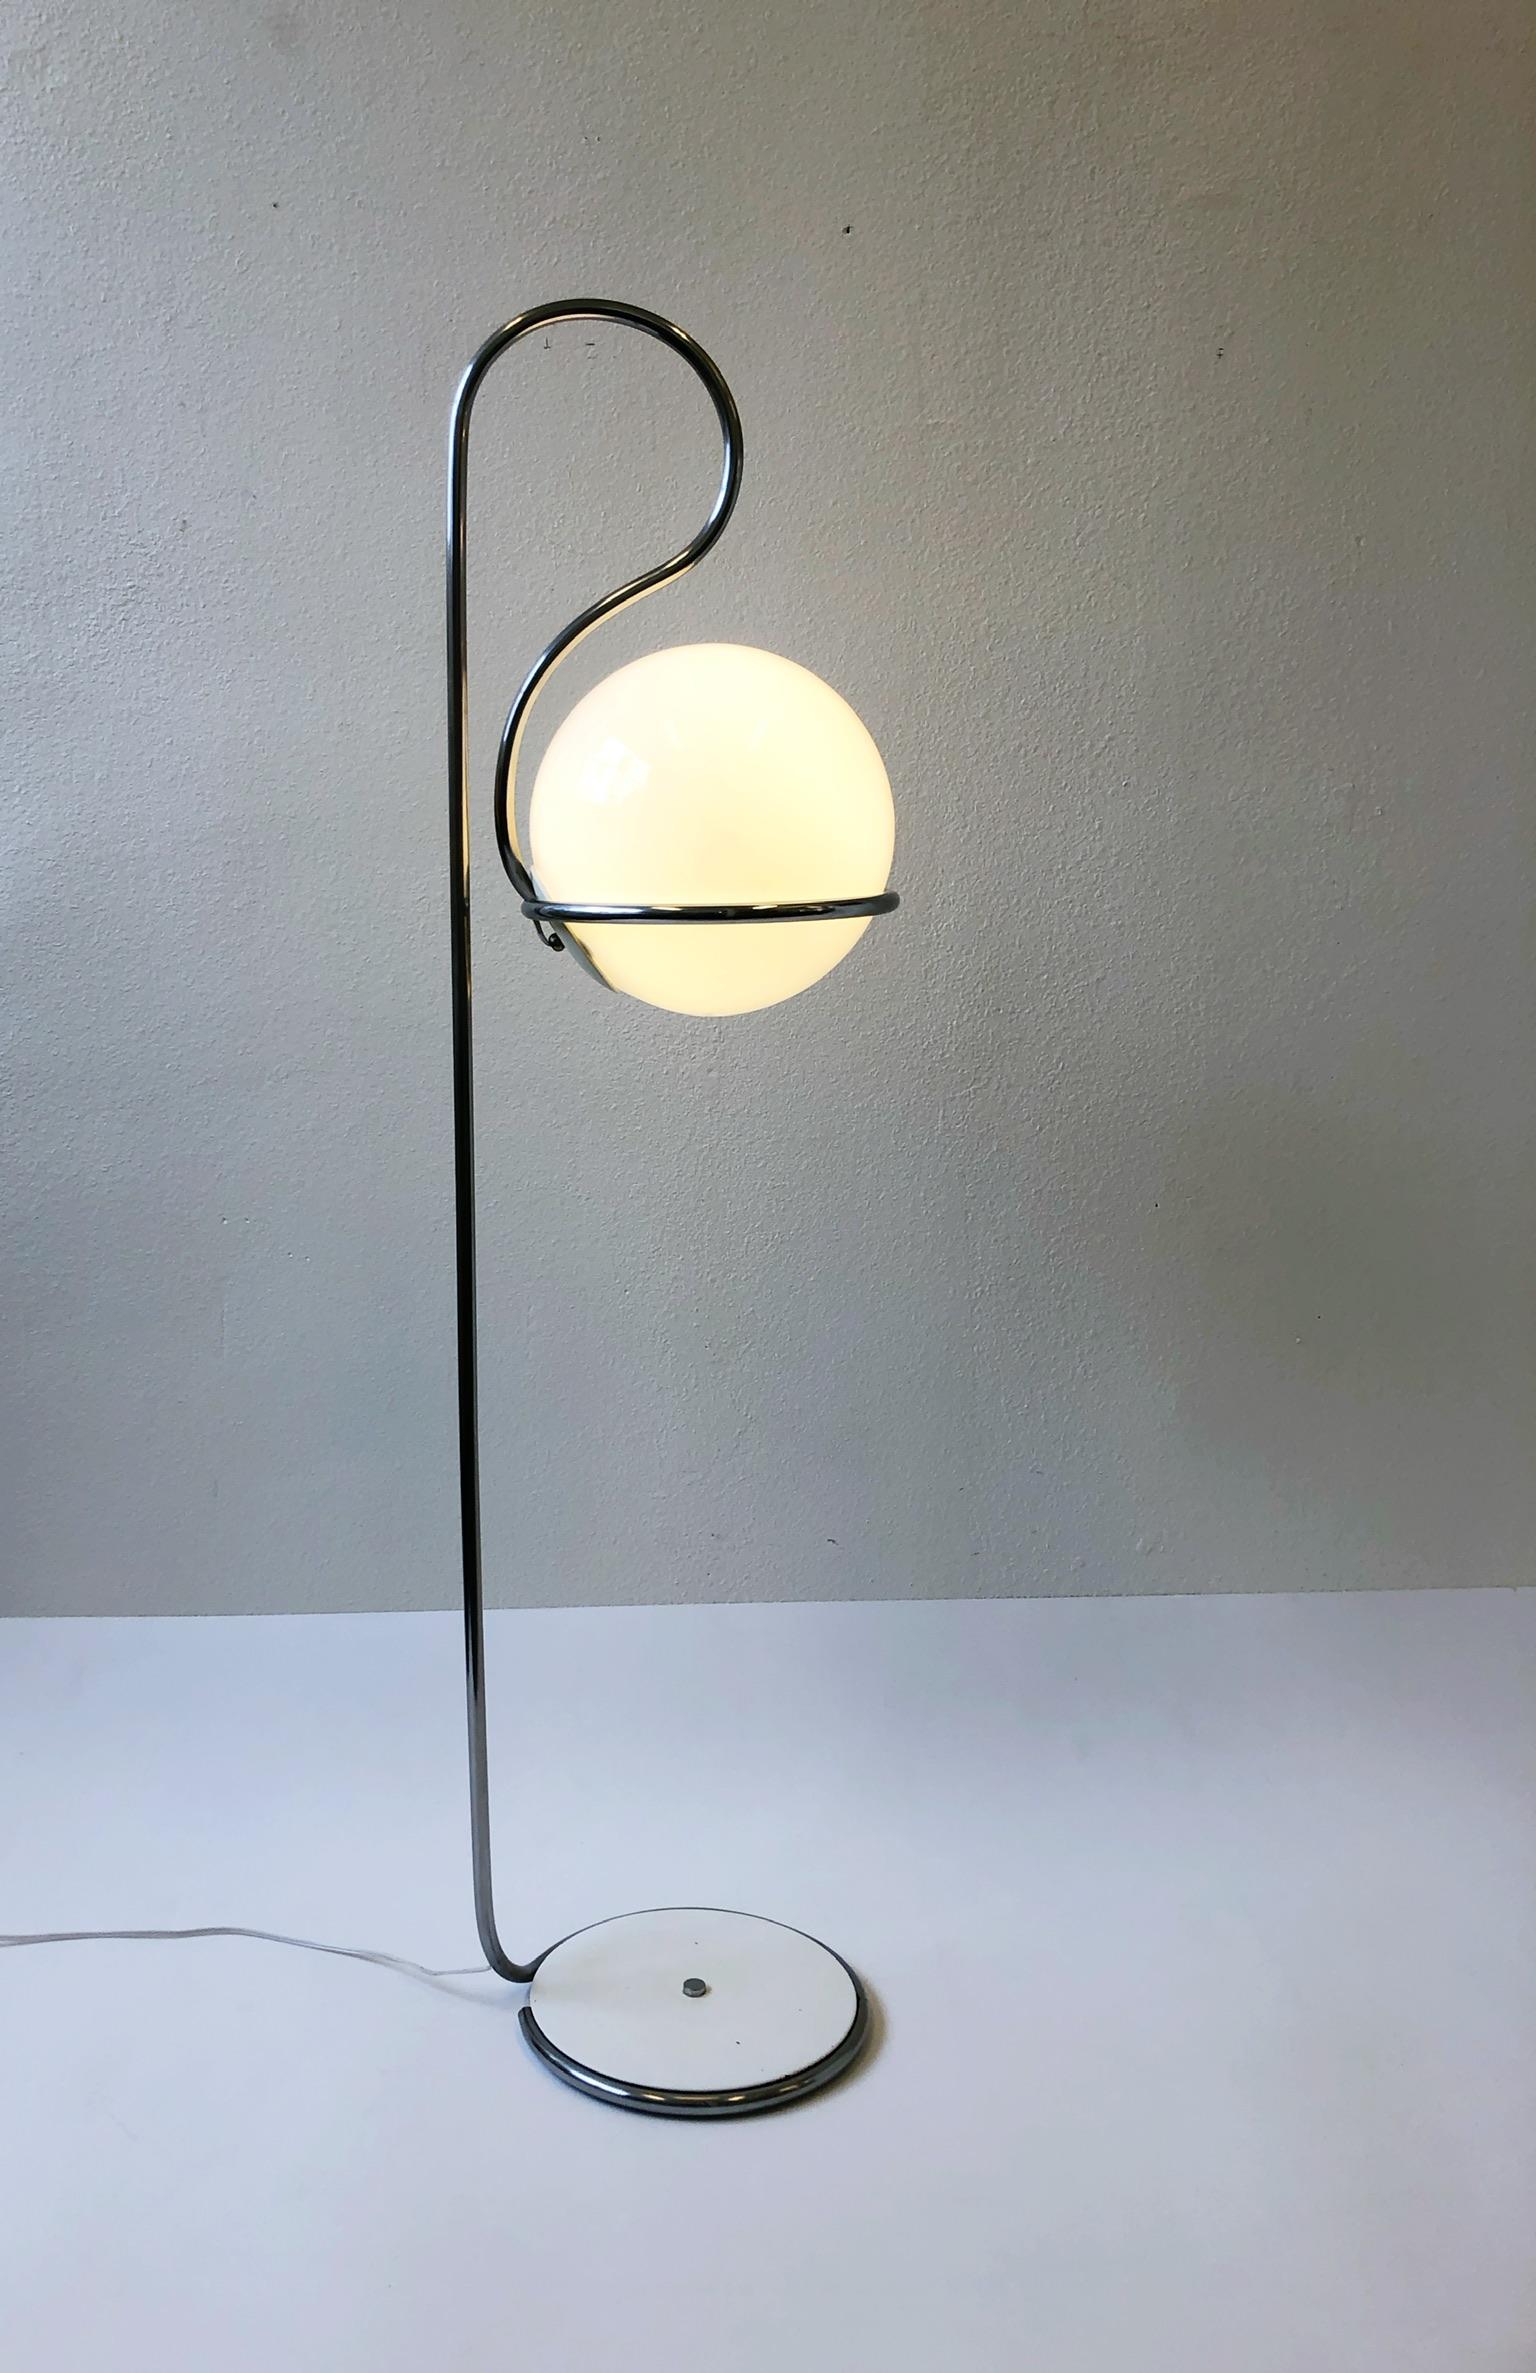 A vintage 1970s Mod floor lamp on the Manner of Italian designer Fabio Lenci. The lamp is constructed of steel that’s polish chrome plated and the globe is glass. The lamp take a regular 75w Edison lightbulb. I would not recommend going higher than